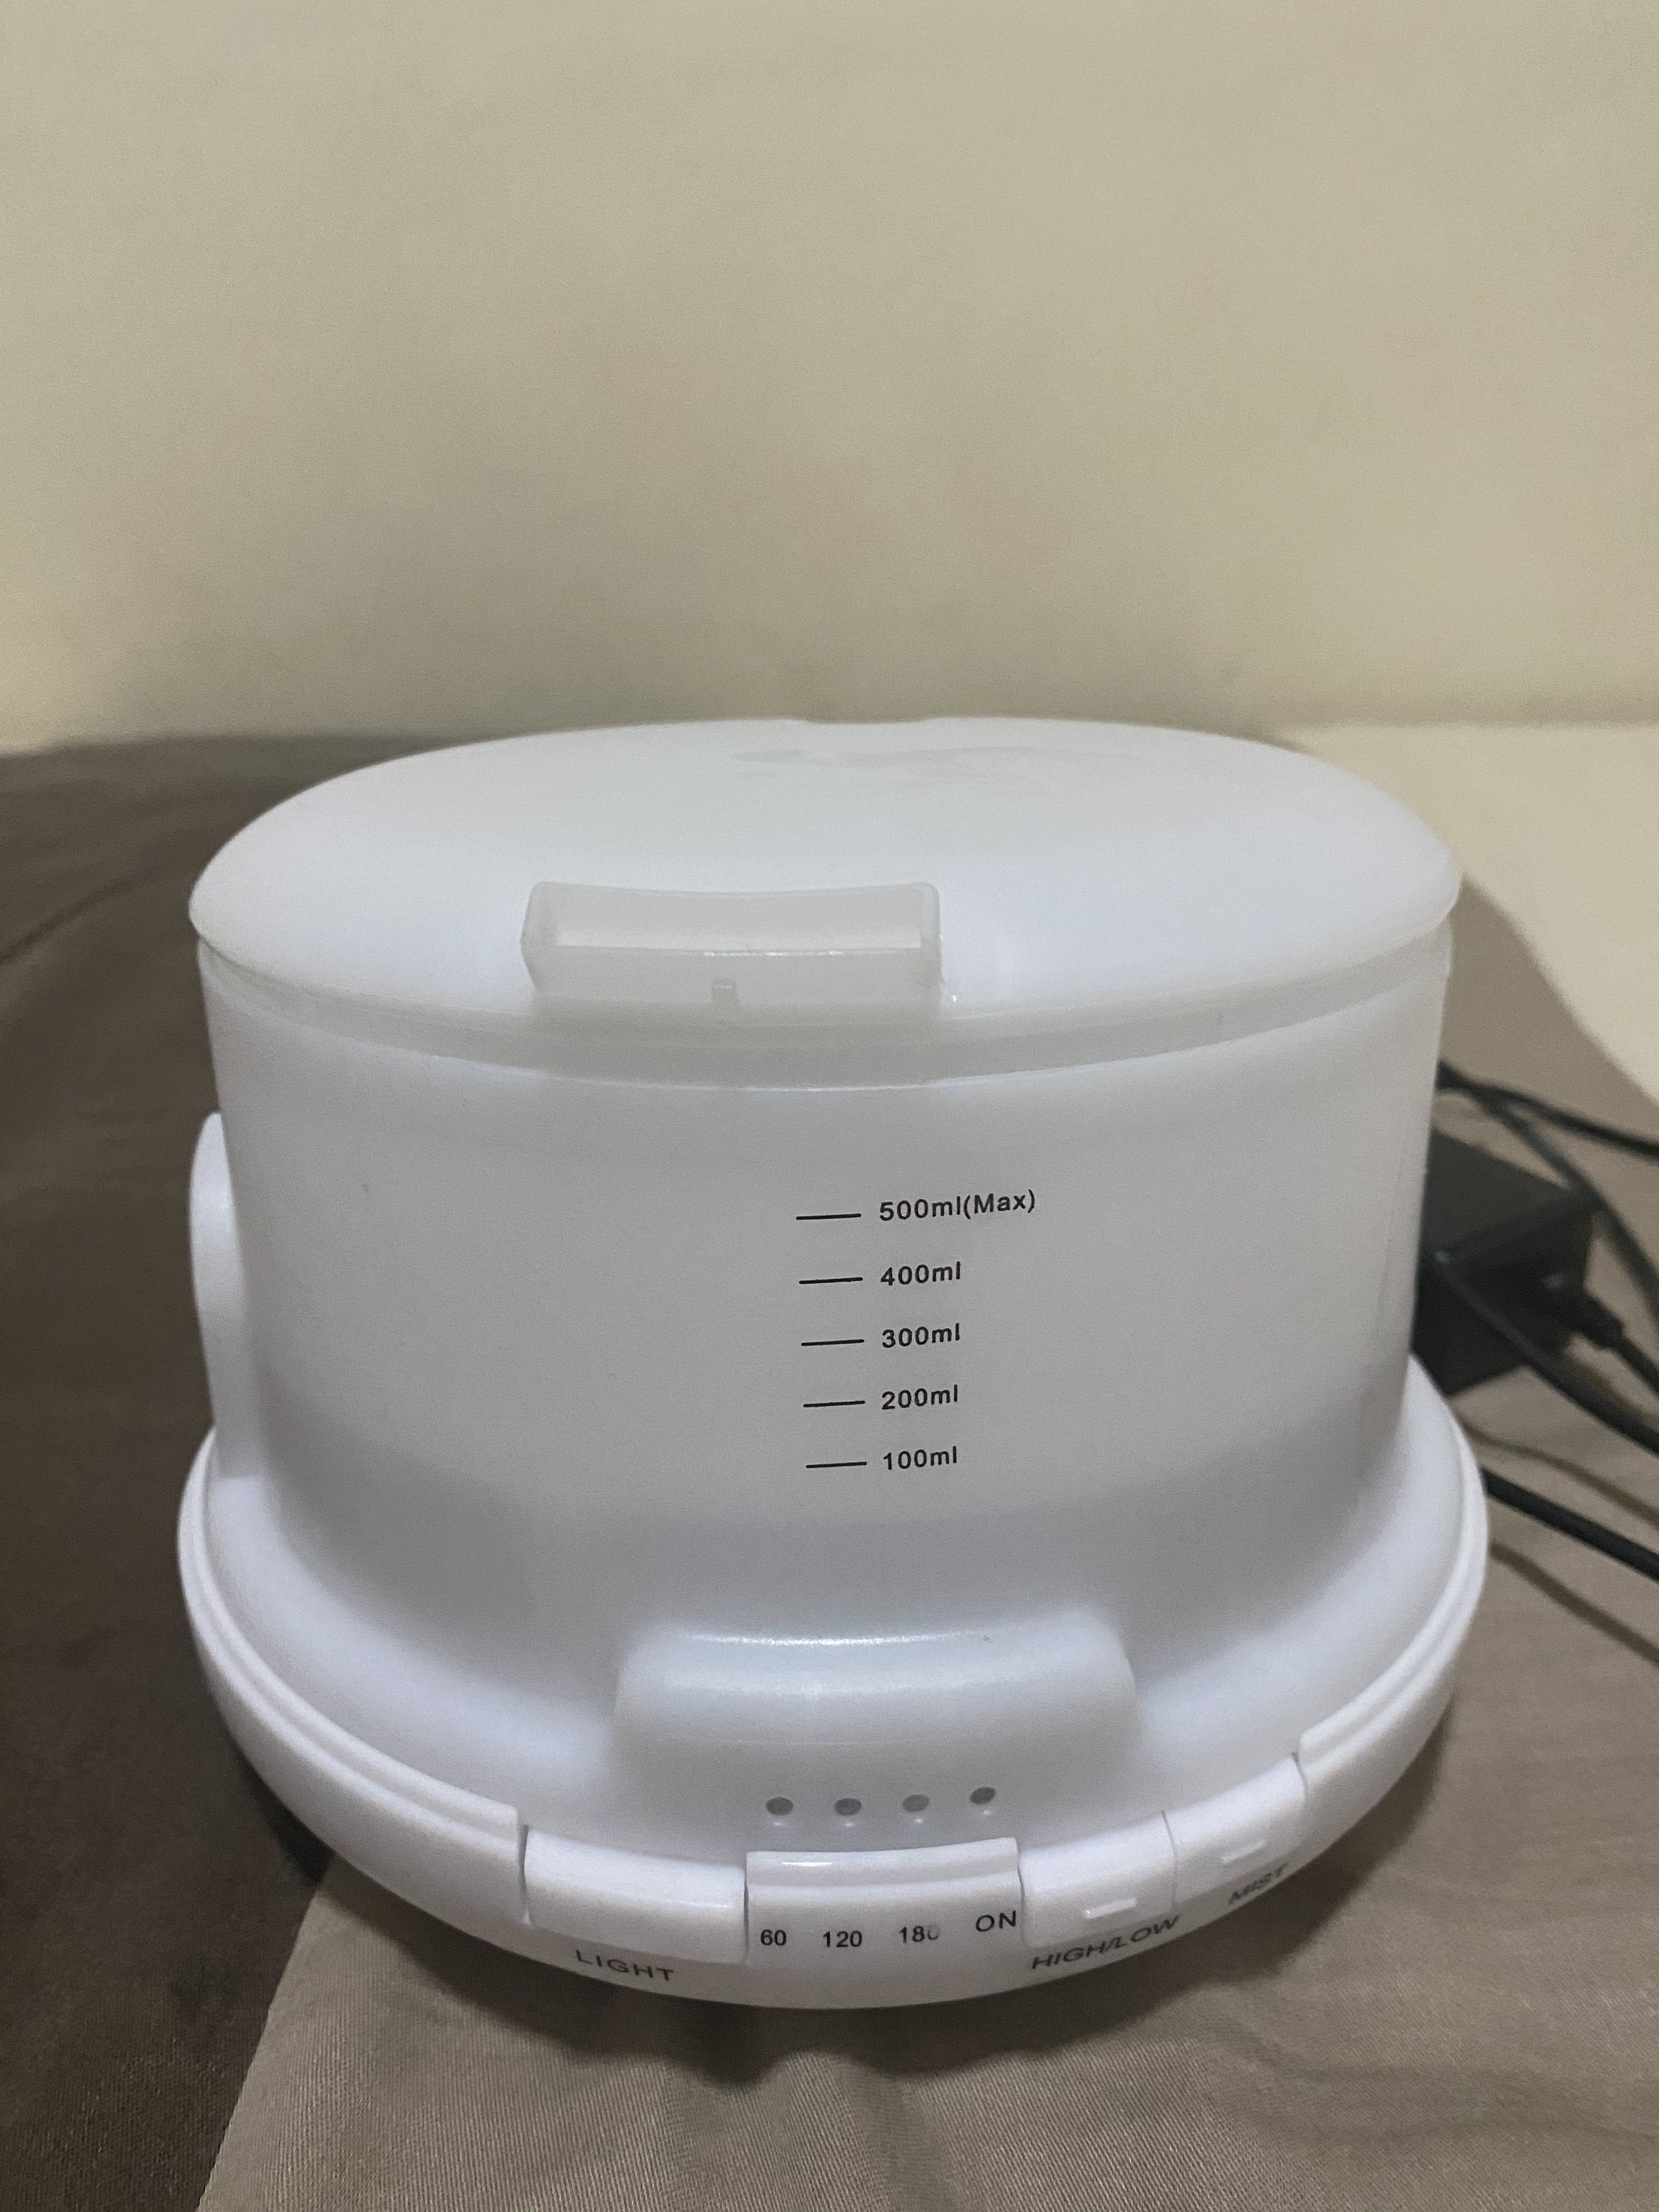 2 in 1 Humidifier and Aroma Diffuser